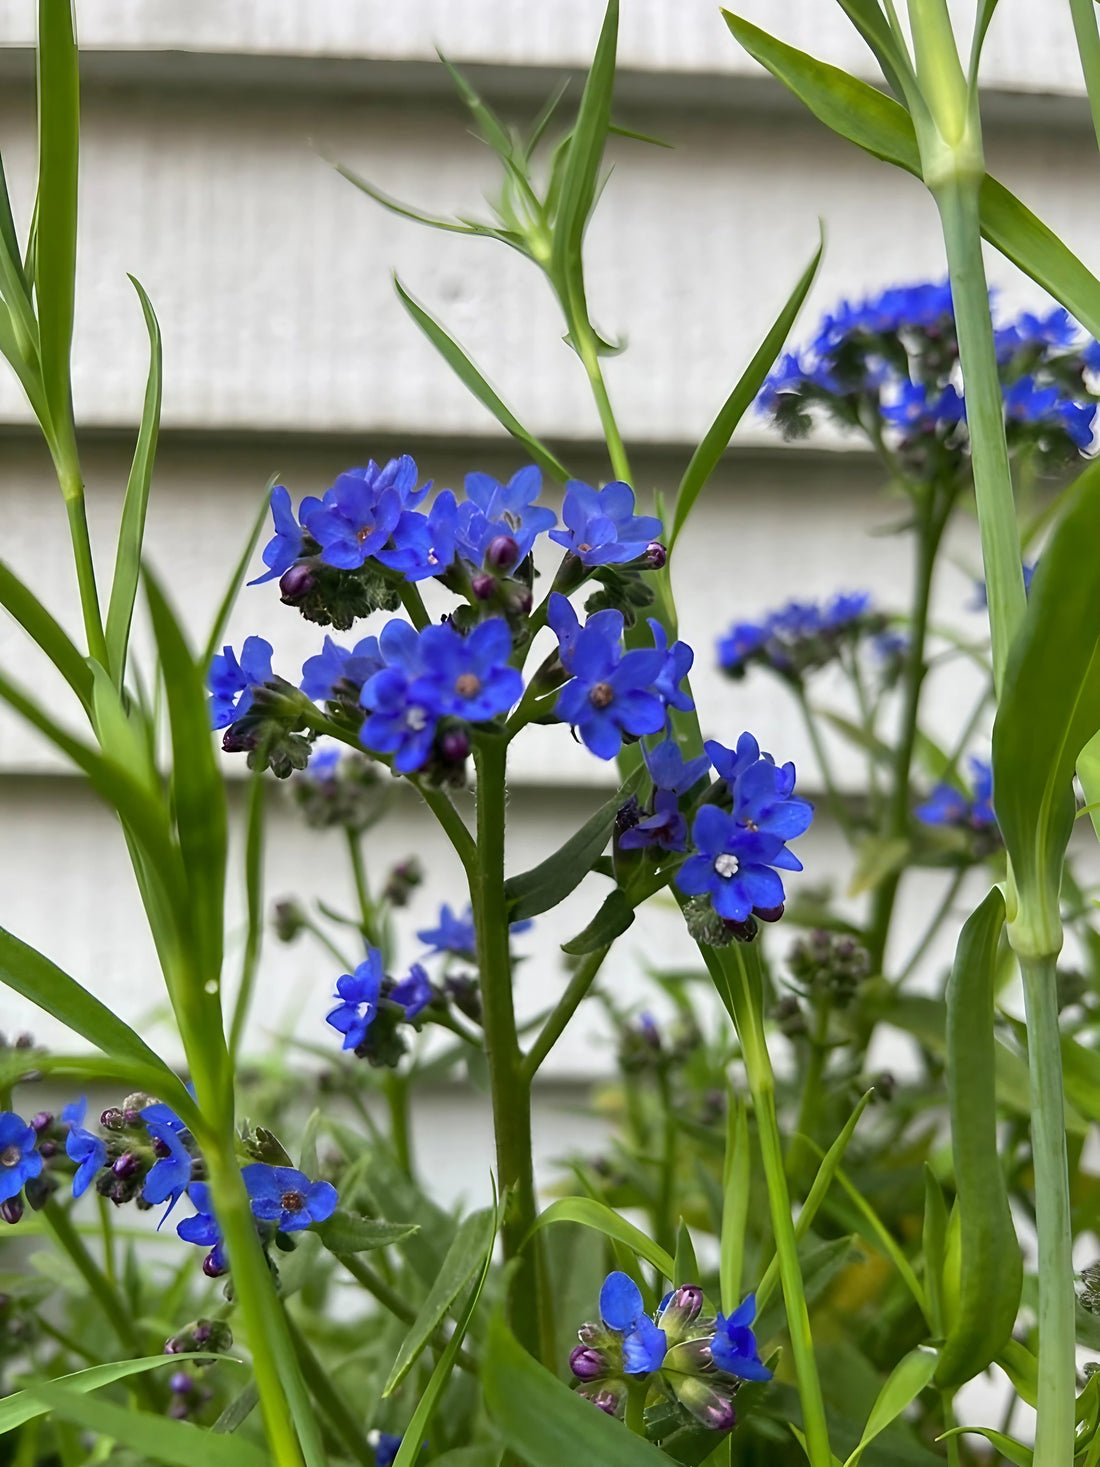 Anchusa Blue Angel flowers potted on a patio